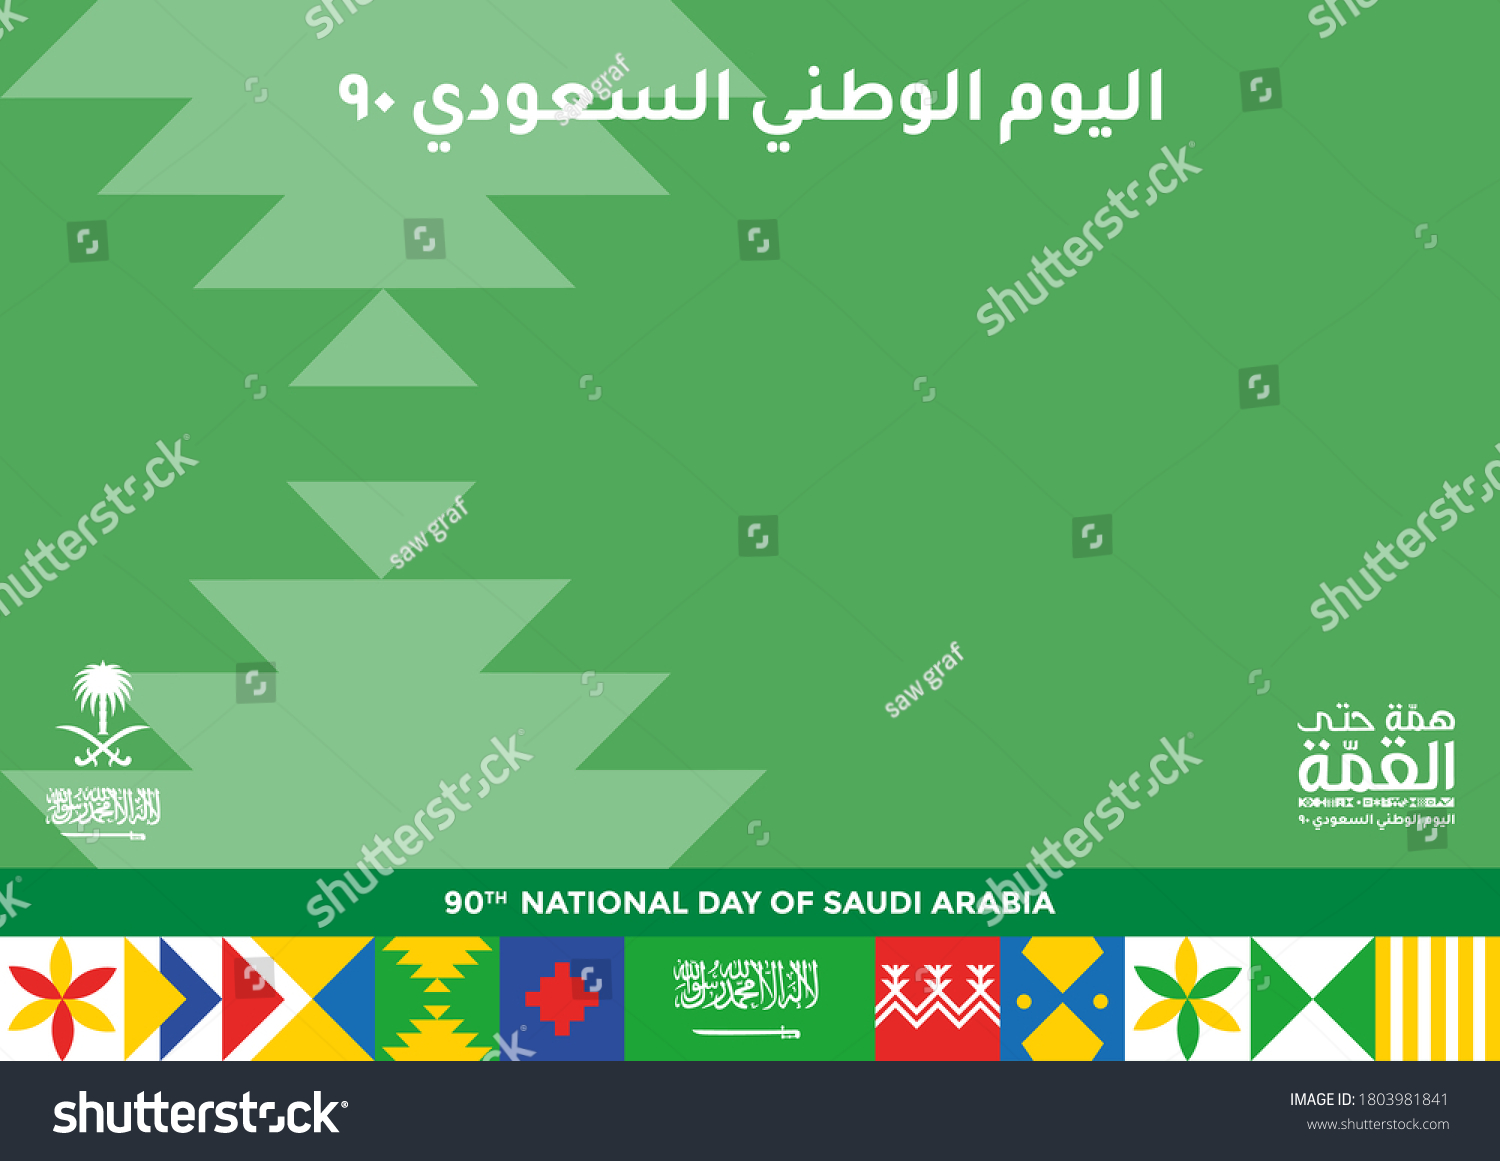 Kingdom of Saudi Arabia 90th National Day logo. September 23. 2020. The Logo meaning "Mettle to the Top, The Saudi National Day 90", 2020. Logo with Saudi Arabian Traditional Colors and Design. Vector #1803981841